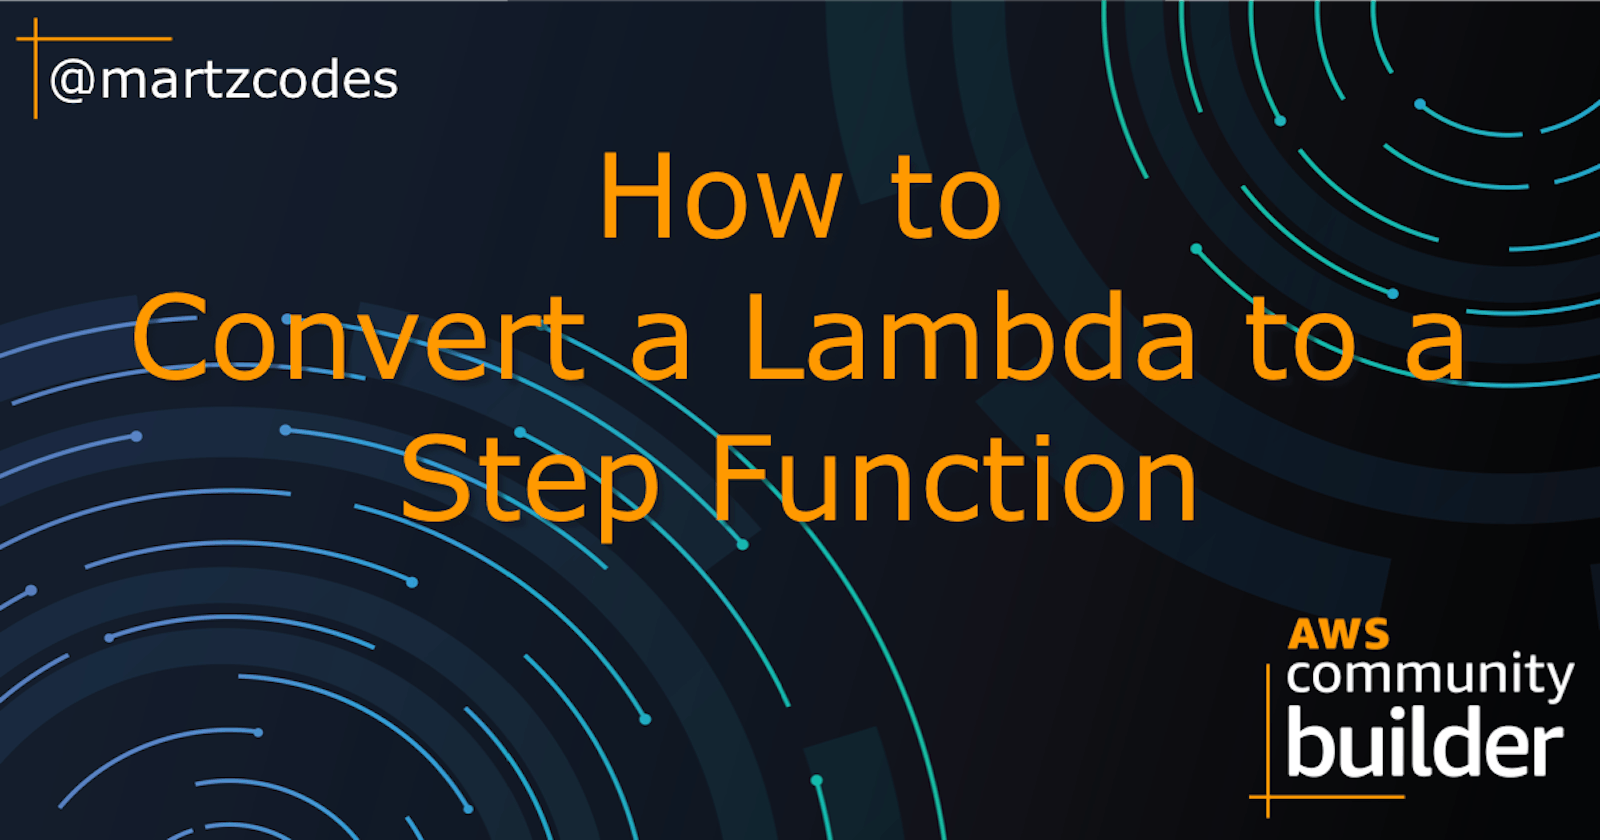 How To Convert a Lambda to a Step Function